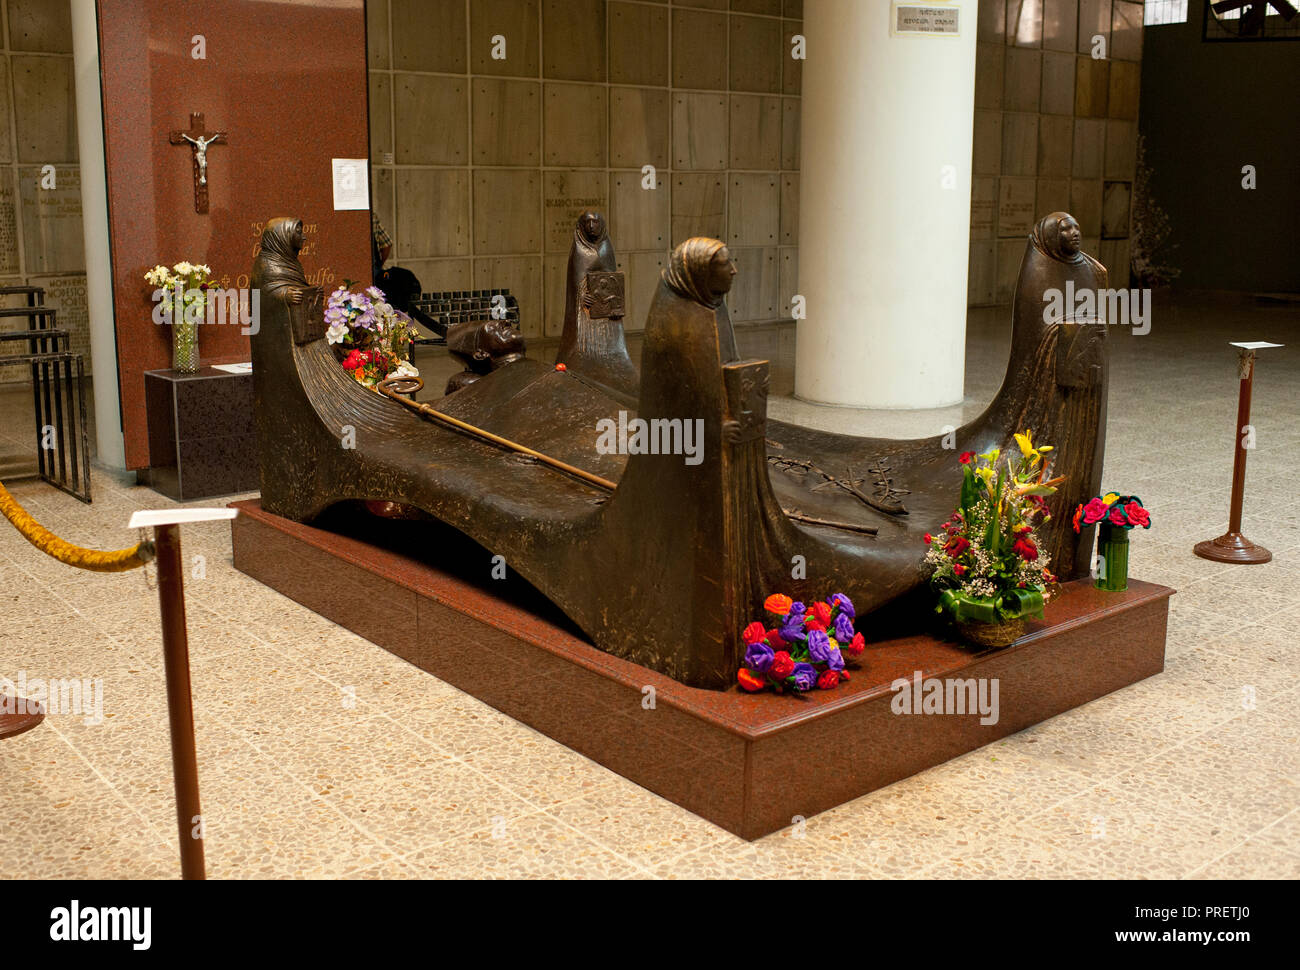 The tomb of Archbishop Oscar Romero of El Salvador at San Salvador's Metropolitan Cathedral. The Archbishop was slain at the alter of his Church of the Divine Providence by a right wing gunman in 1980. ”scar Arnulfo Romero y Gald·mez was a bishop of the Catholic Church in El Salvador. He became the fourth Archbishop of San Salvador, succeeding Luis Ch·vez, and spoke out against poverty, social injustice, assassinations and torture. Romero was assassinated while offering Mass on March 24,1980. - To license this image, click on the shopping cart below - Stock Photo